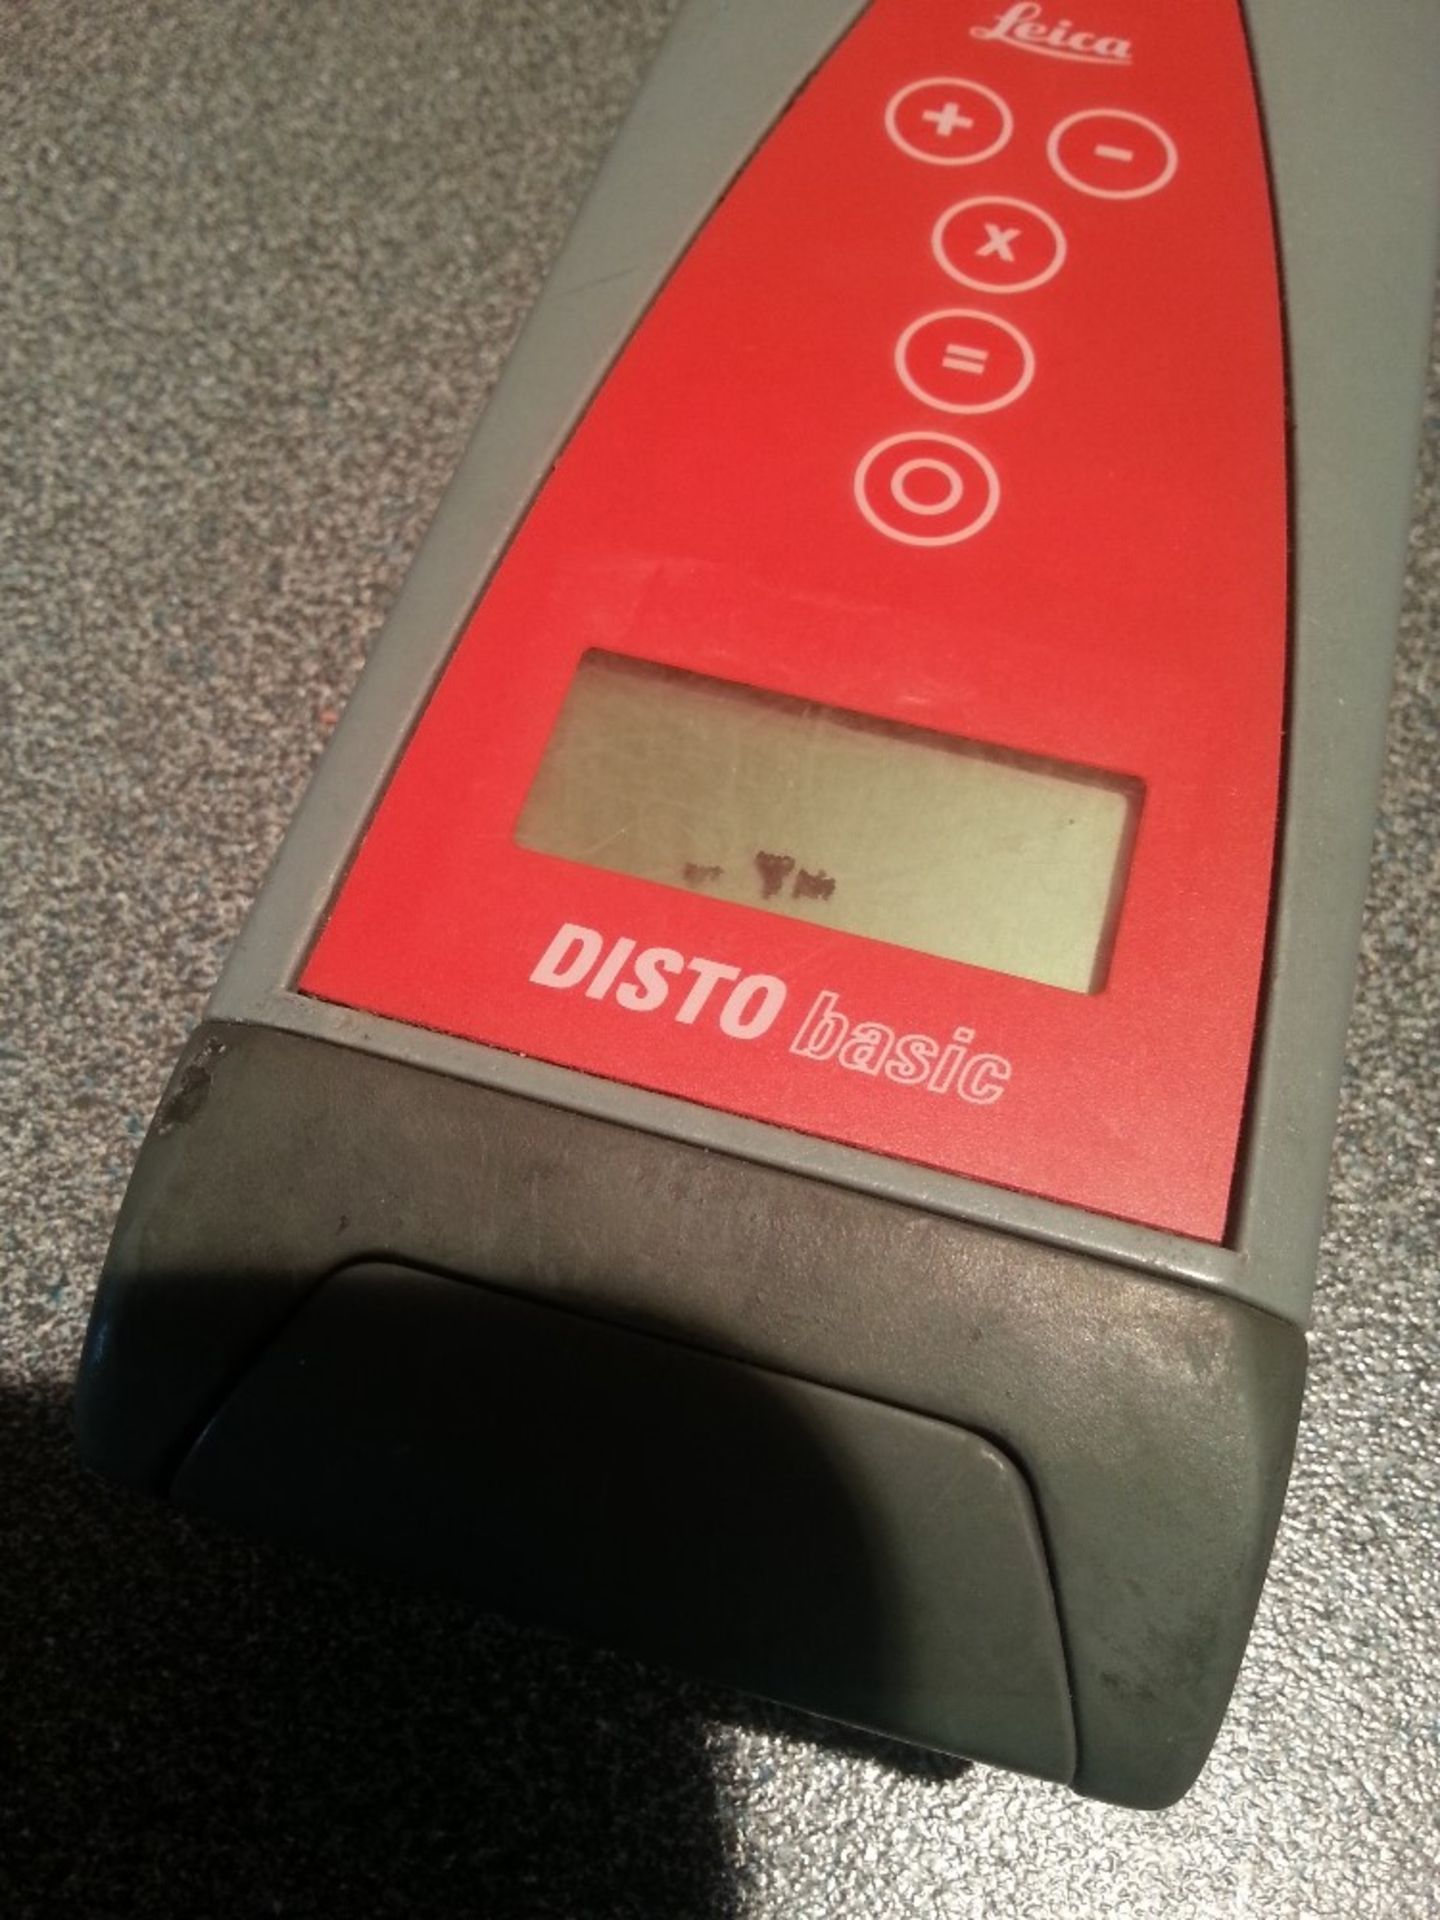 LEICA  Distro Basic Laser Measure - Powers On - Marks To Screen - Image 2 of 2